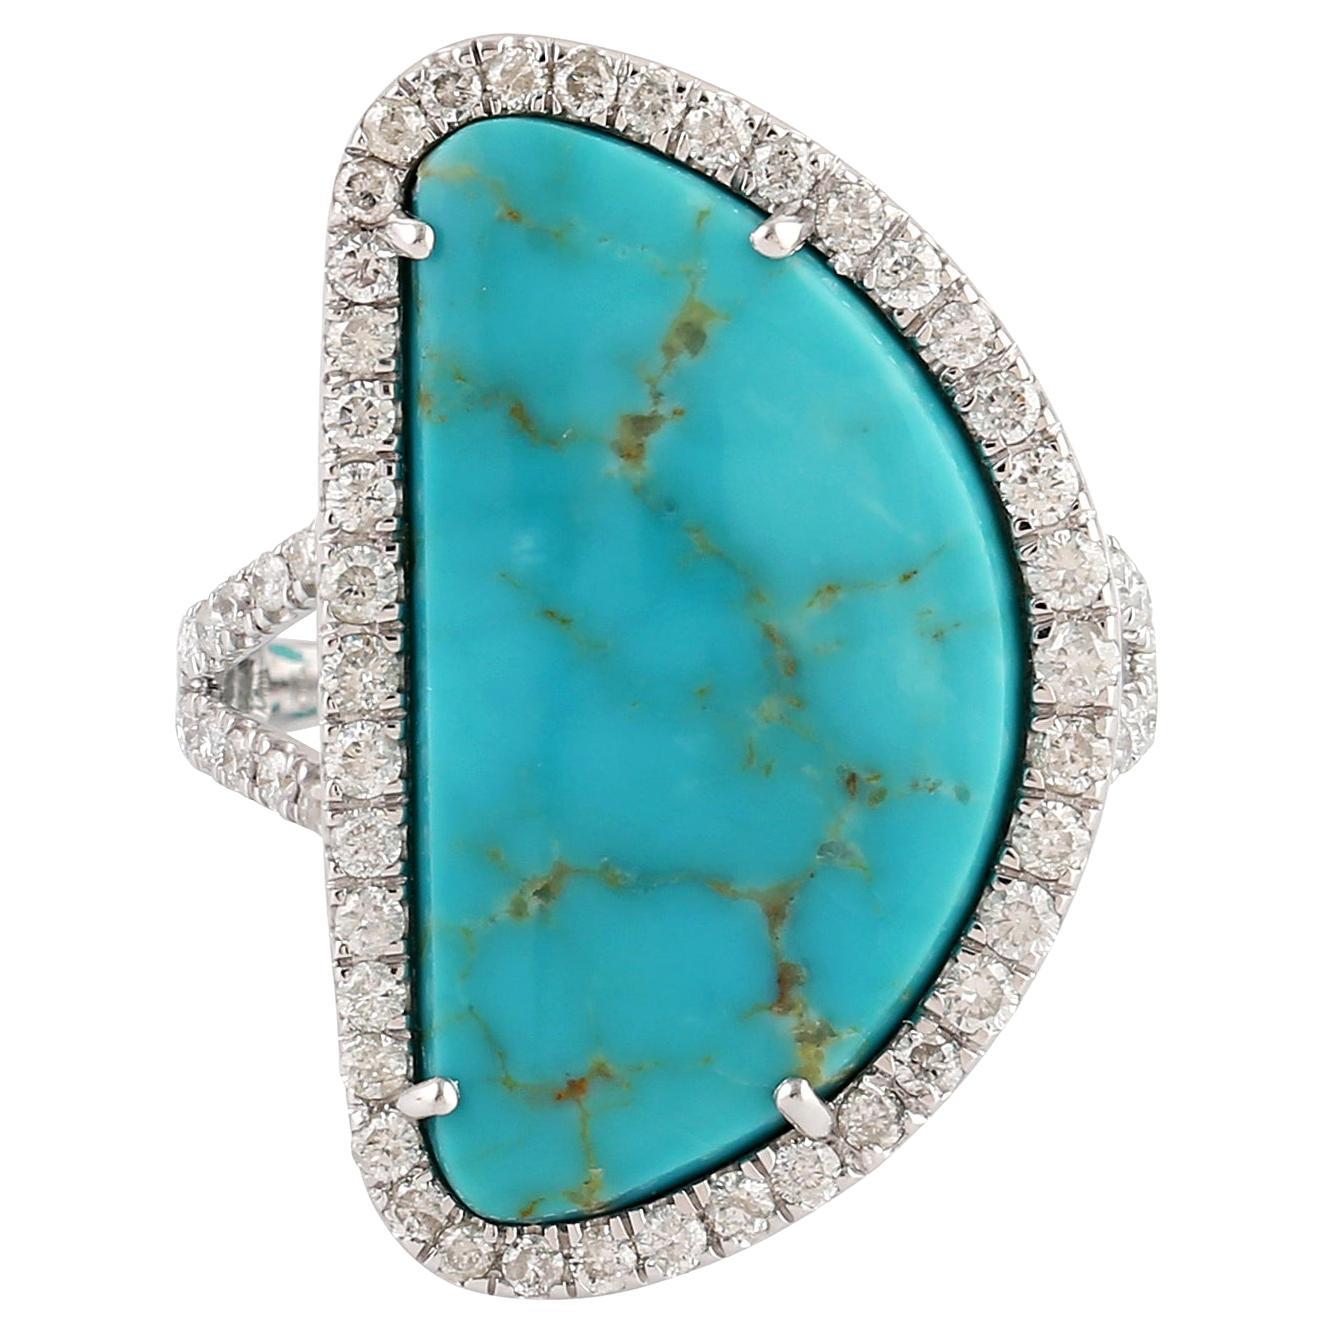 7.60ct Natural Turquoise Cocktail Ring With Diamonds Made In 18k White Gold